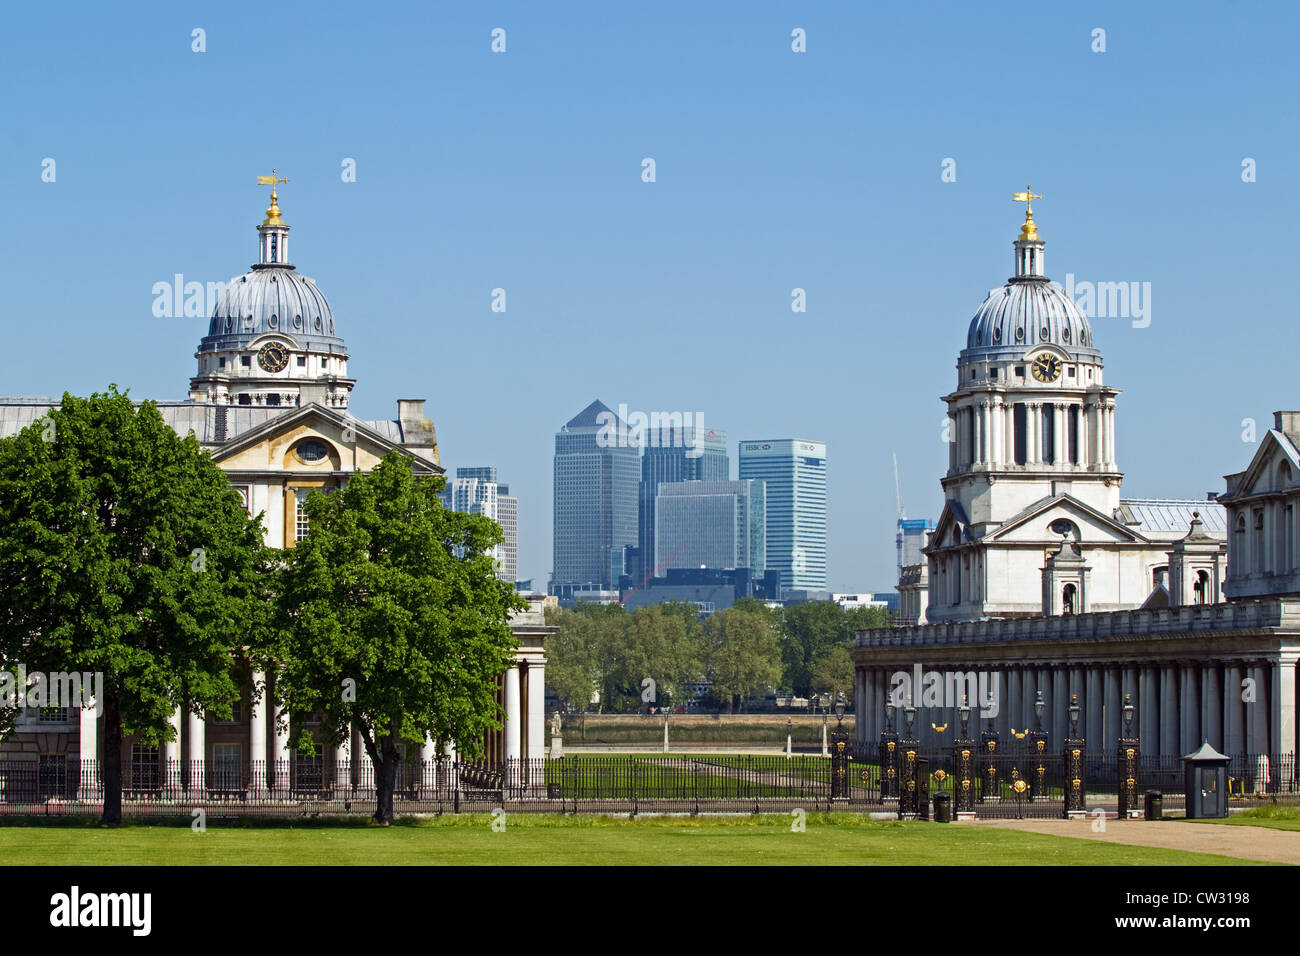 Old Royal Naval College, Greenwich, London, Sunday, May 27, 2012. Stock Photo